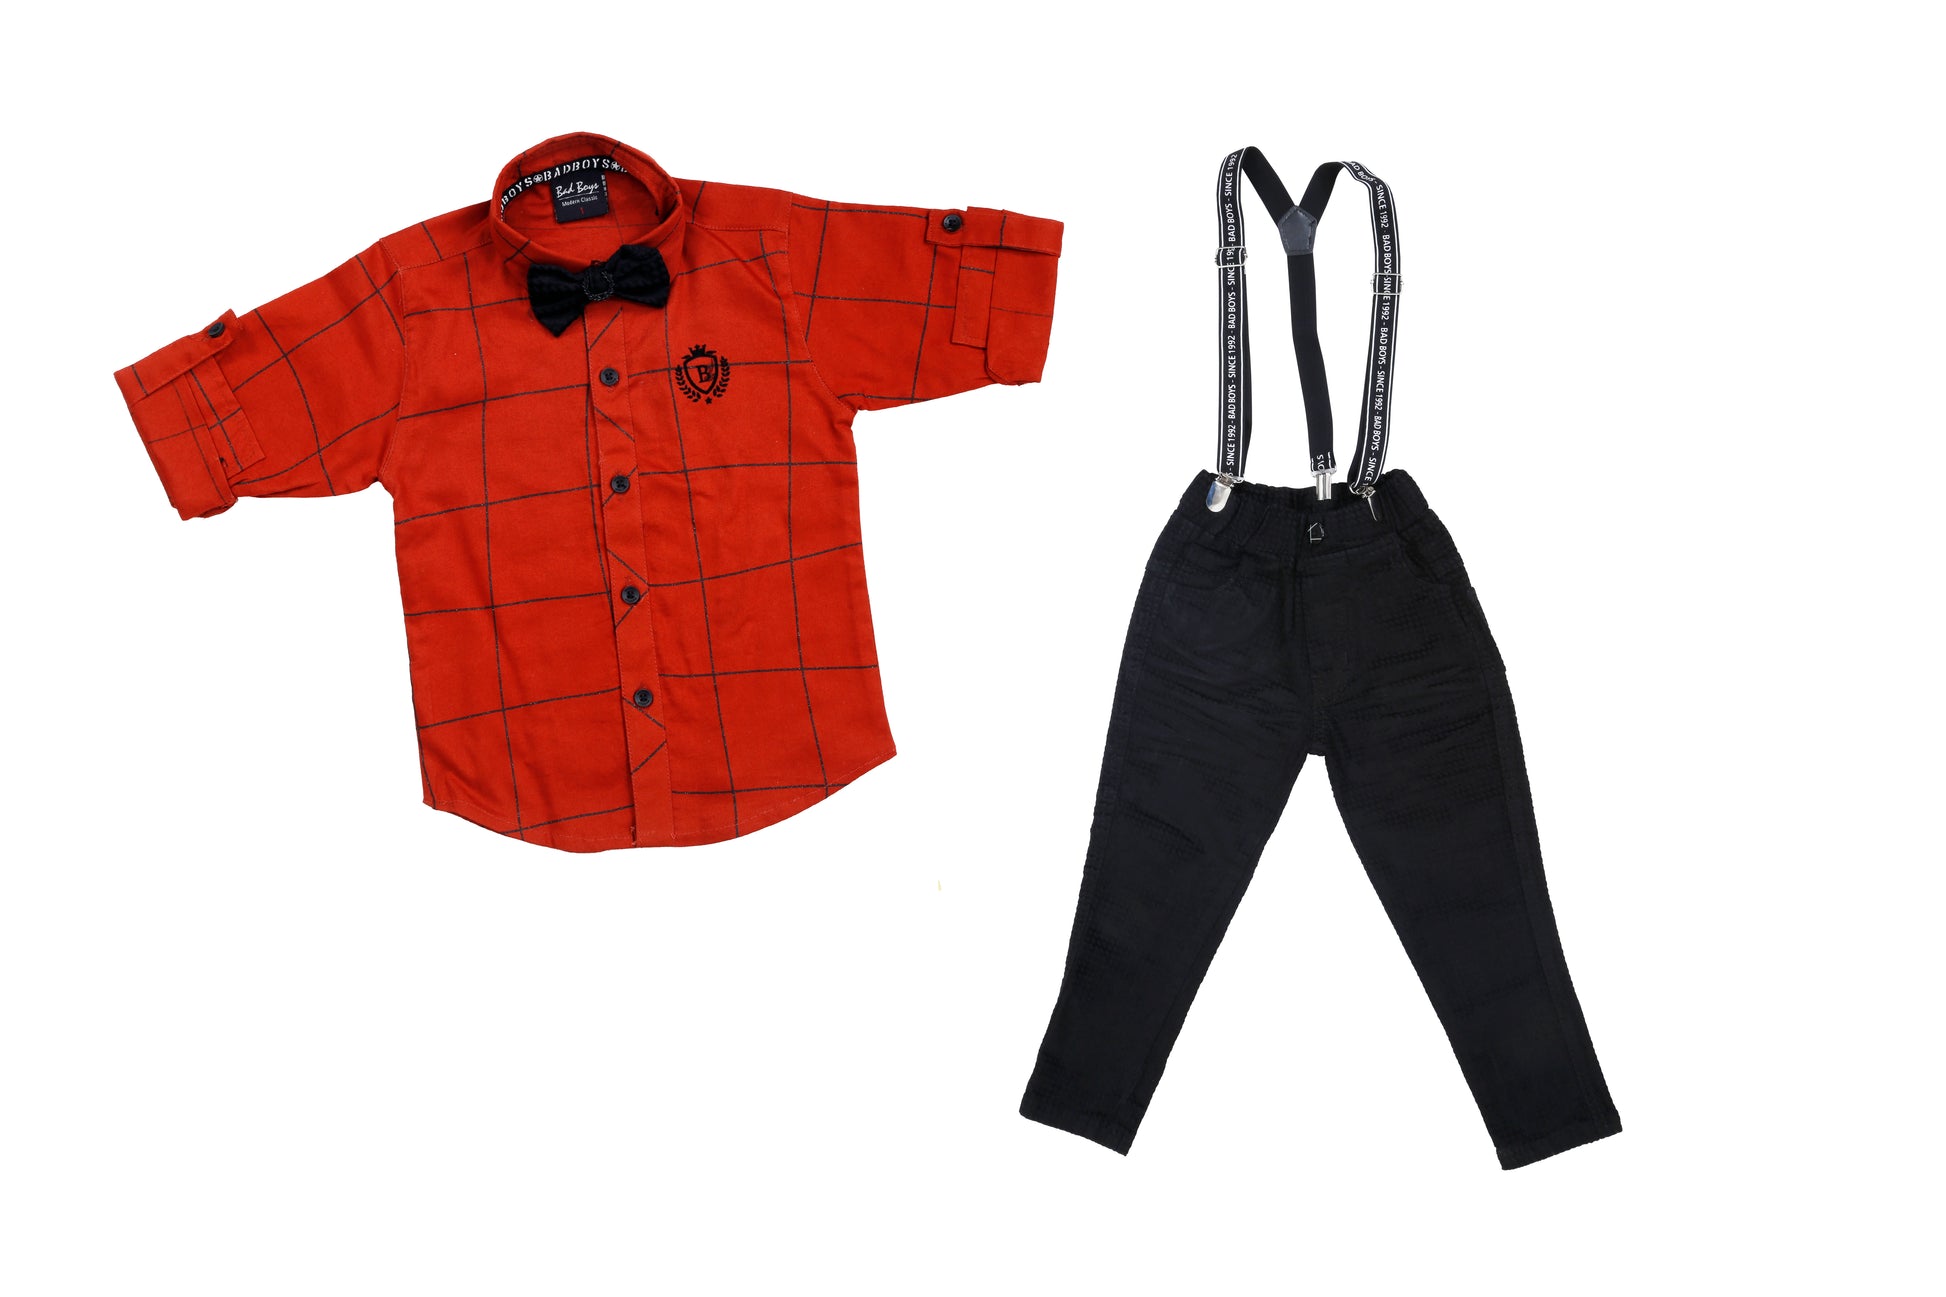 Bad Boys party Outfit with Suspenders and a Bow. - mashup boys